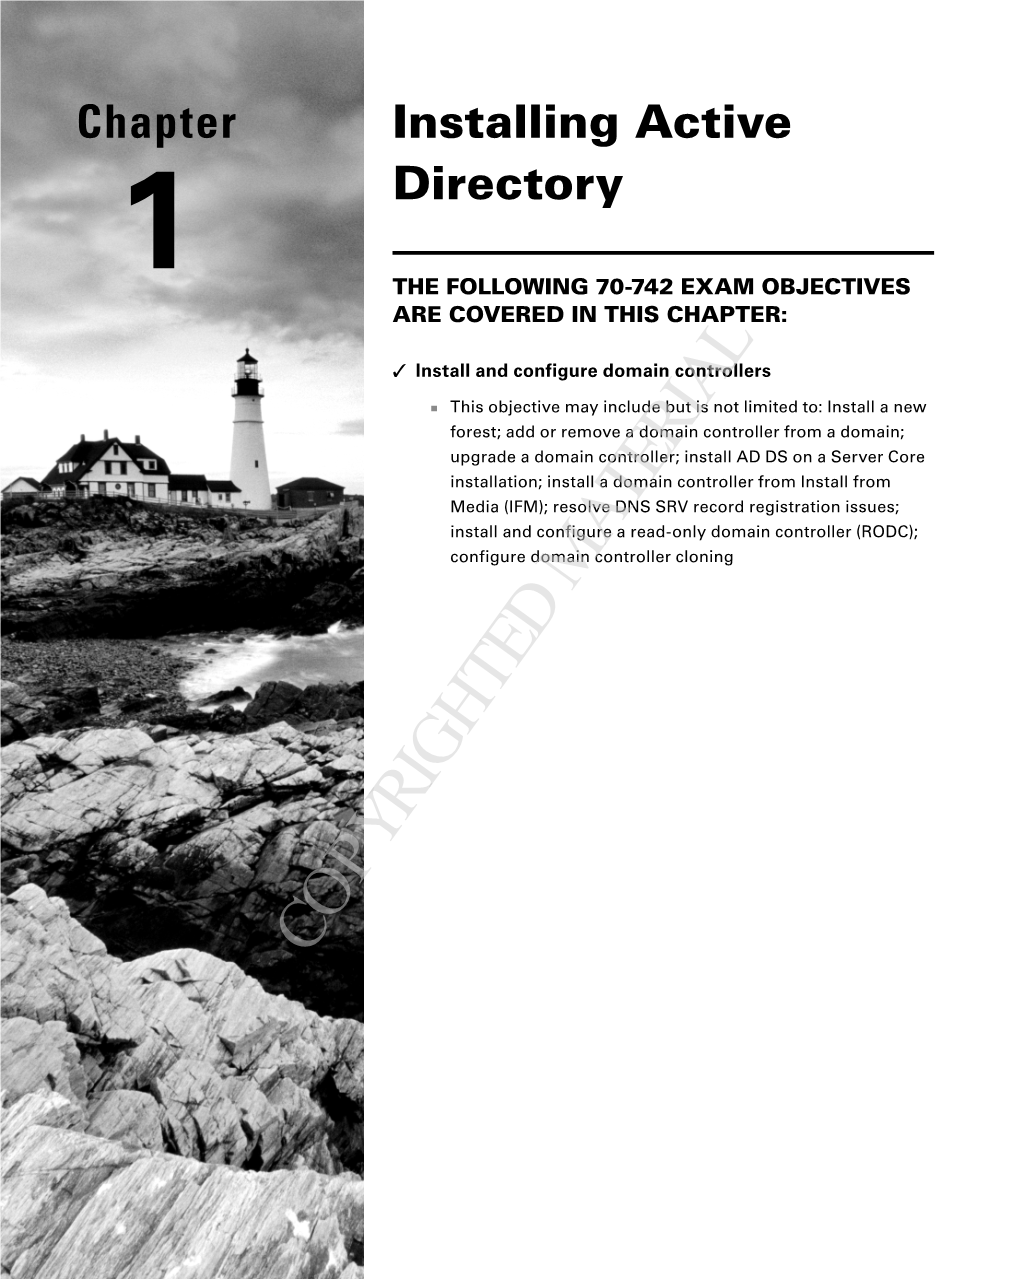 Chapter 1 Installing Active Directory